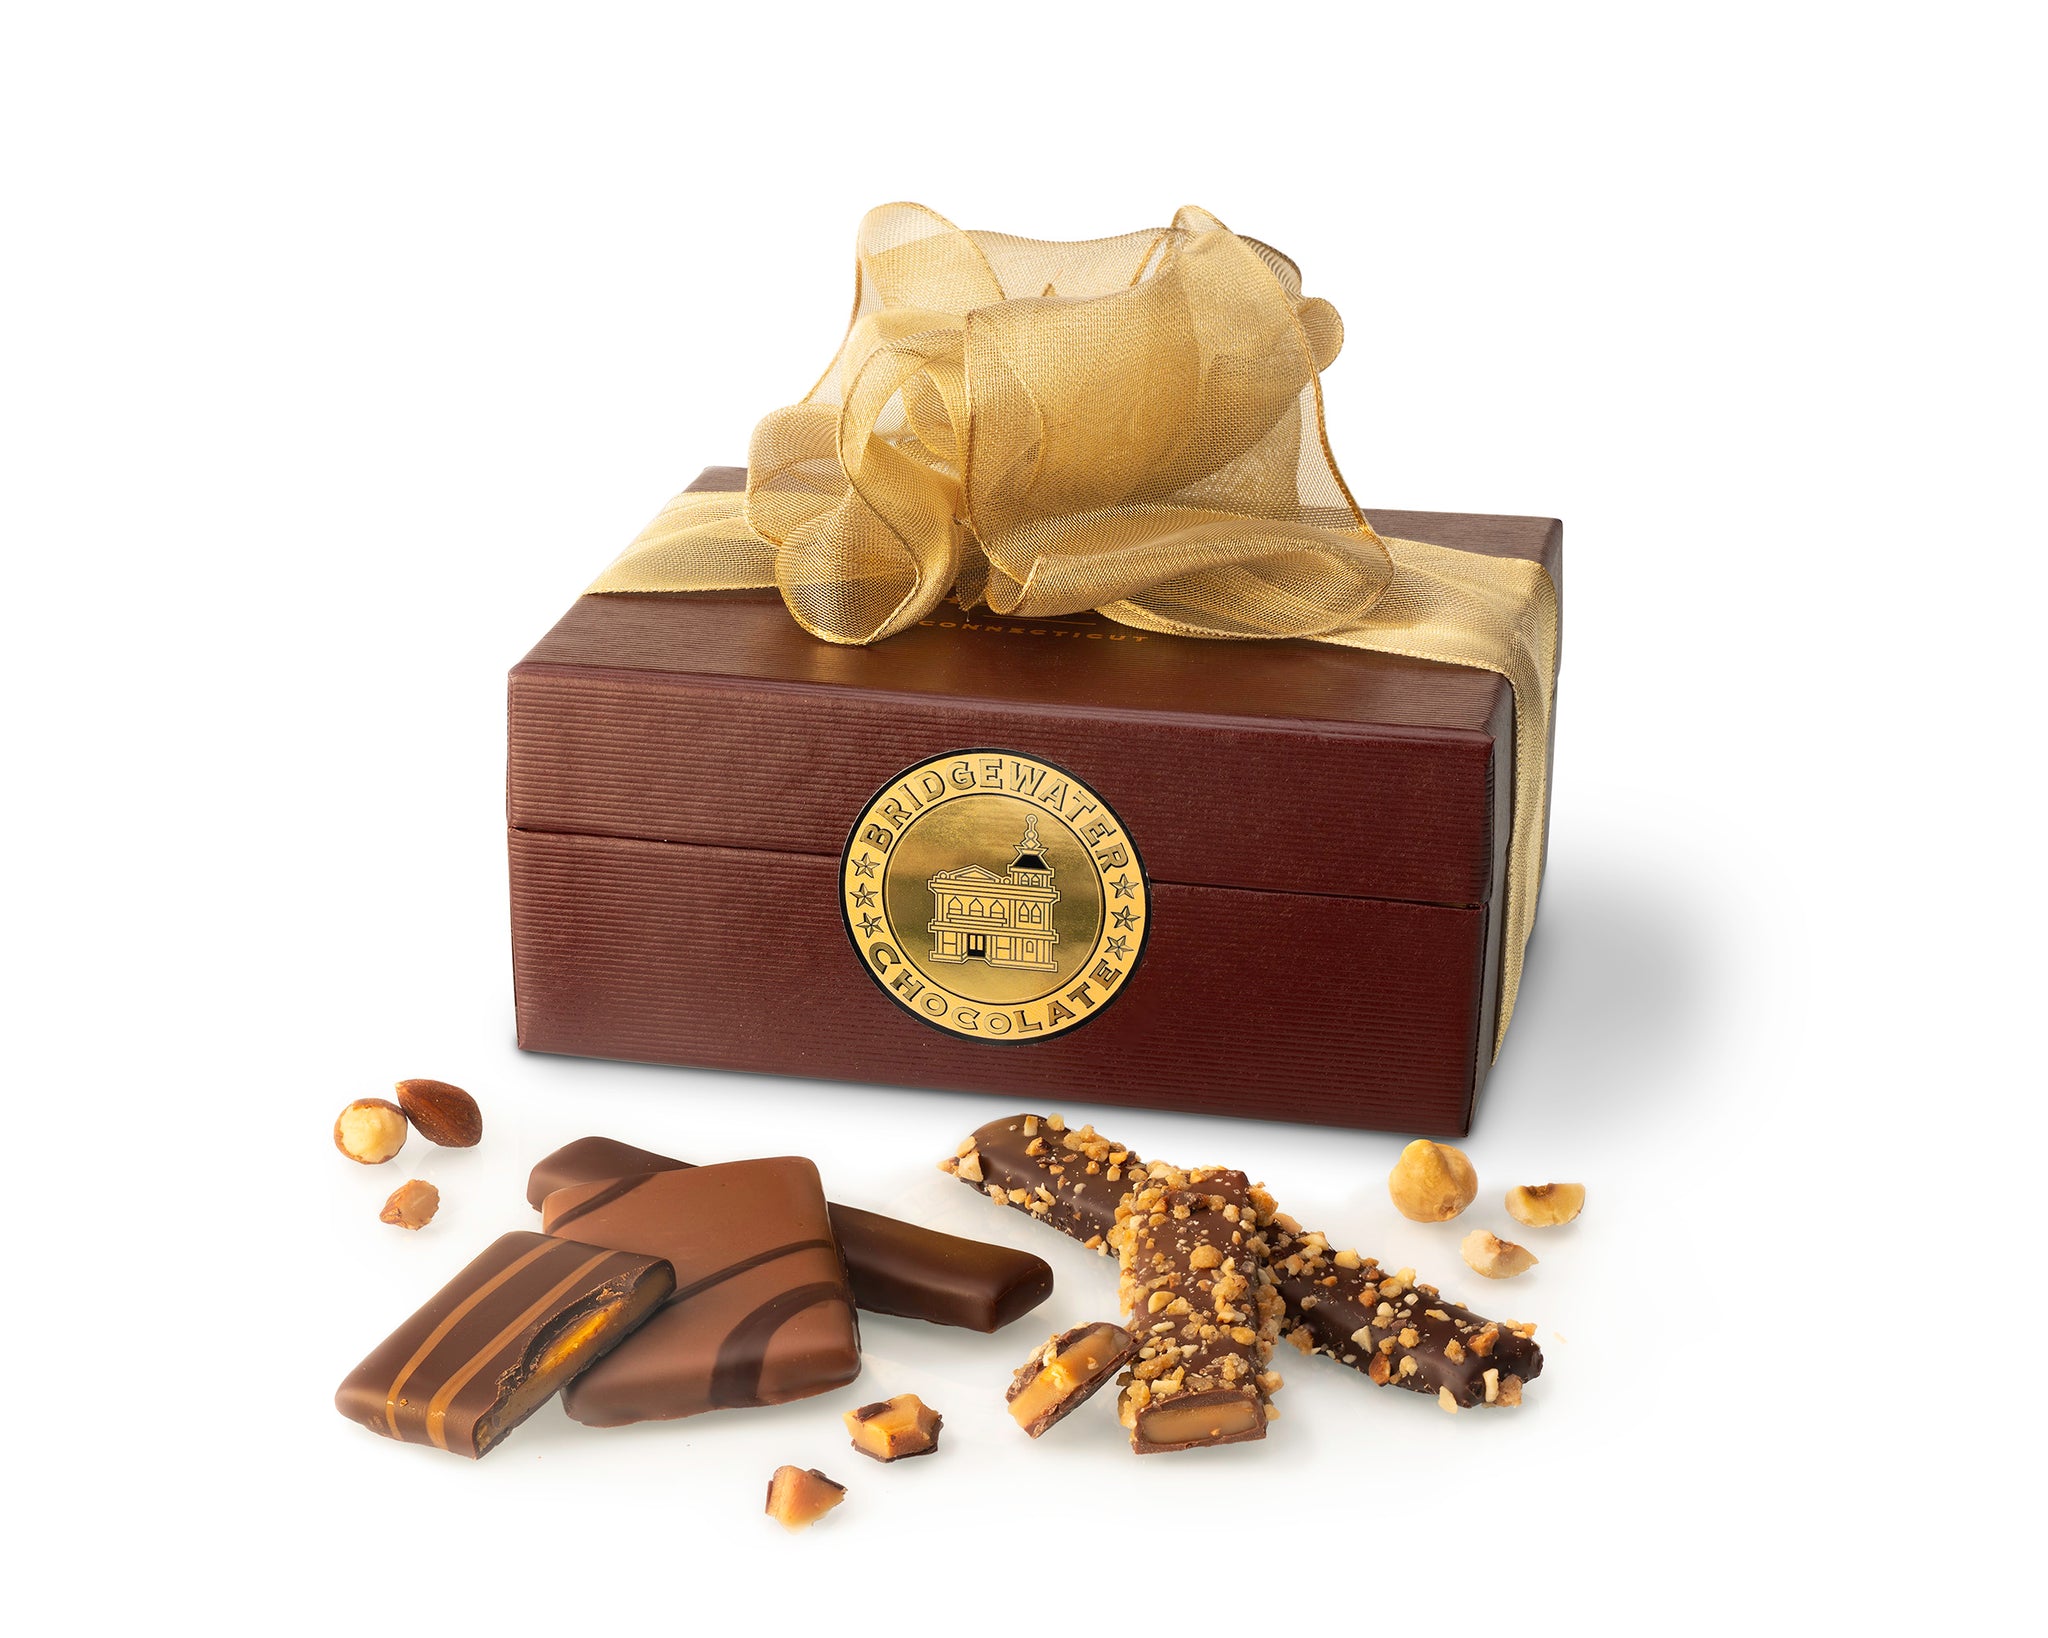 Buy Premium Chocolate Gift Boxes | Chocolate Gifts Online